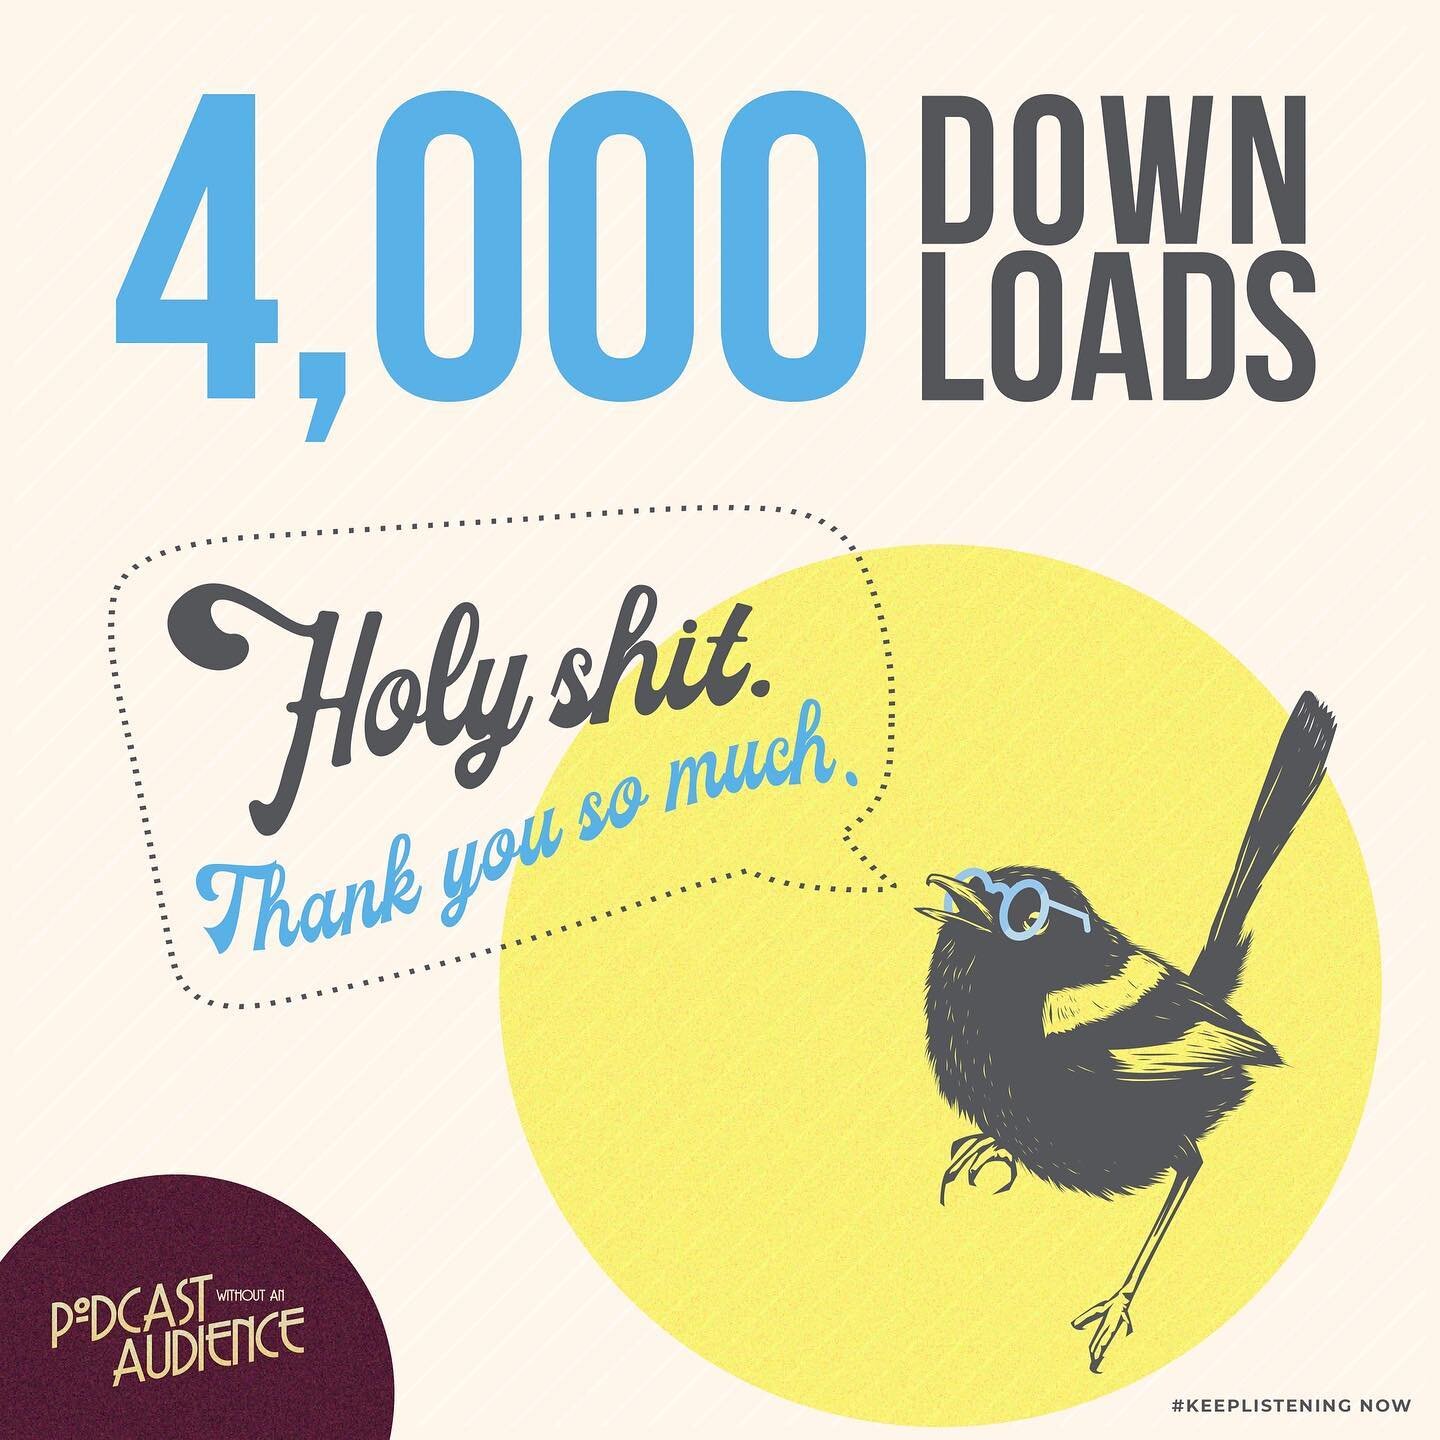 Well damn, thanks everyone! 

#podwithoutanaud #blinktwice #keeplistening #podcast #podcasting ##spotify #podcaster #podcastcommunity ##podcastshows #podcastnuetwork #podcaster #podcasthost #pwaa #podcastwithoutanaudience #ornot